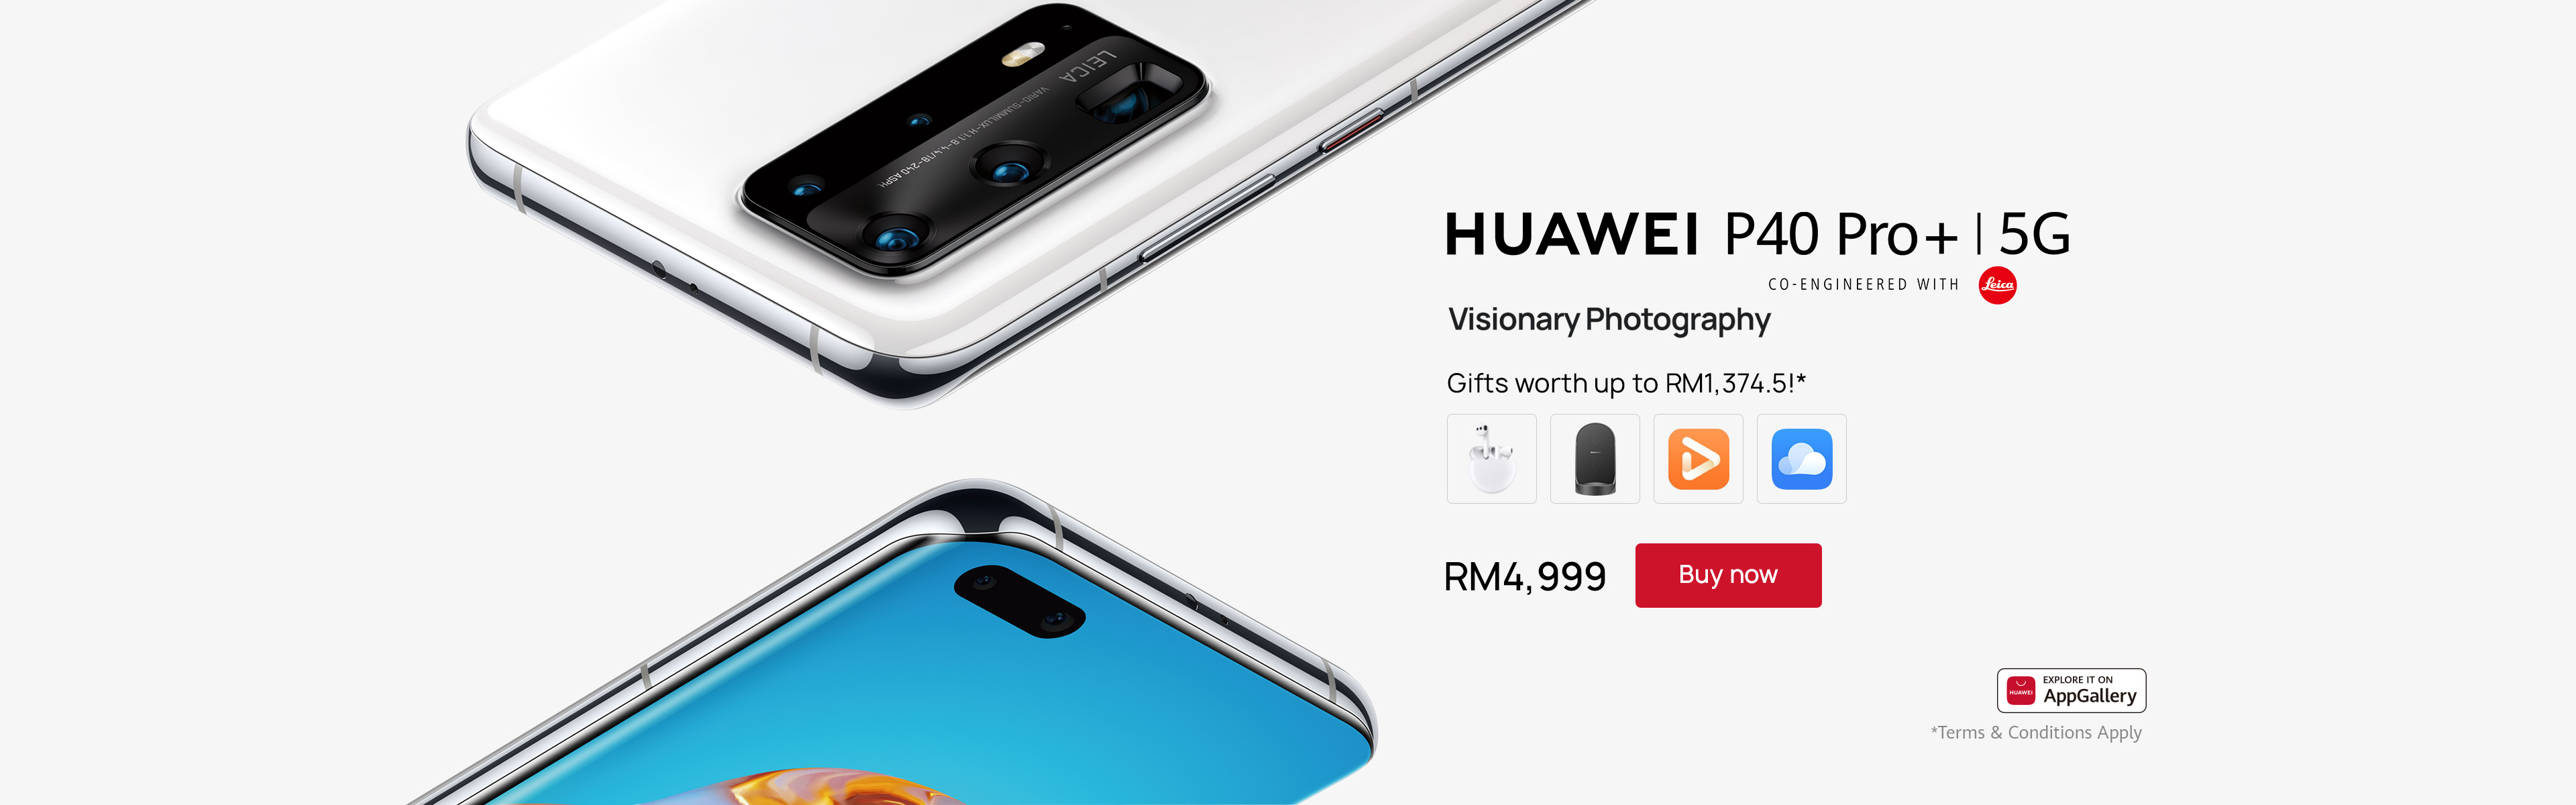 should i buy a huawei phone now